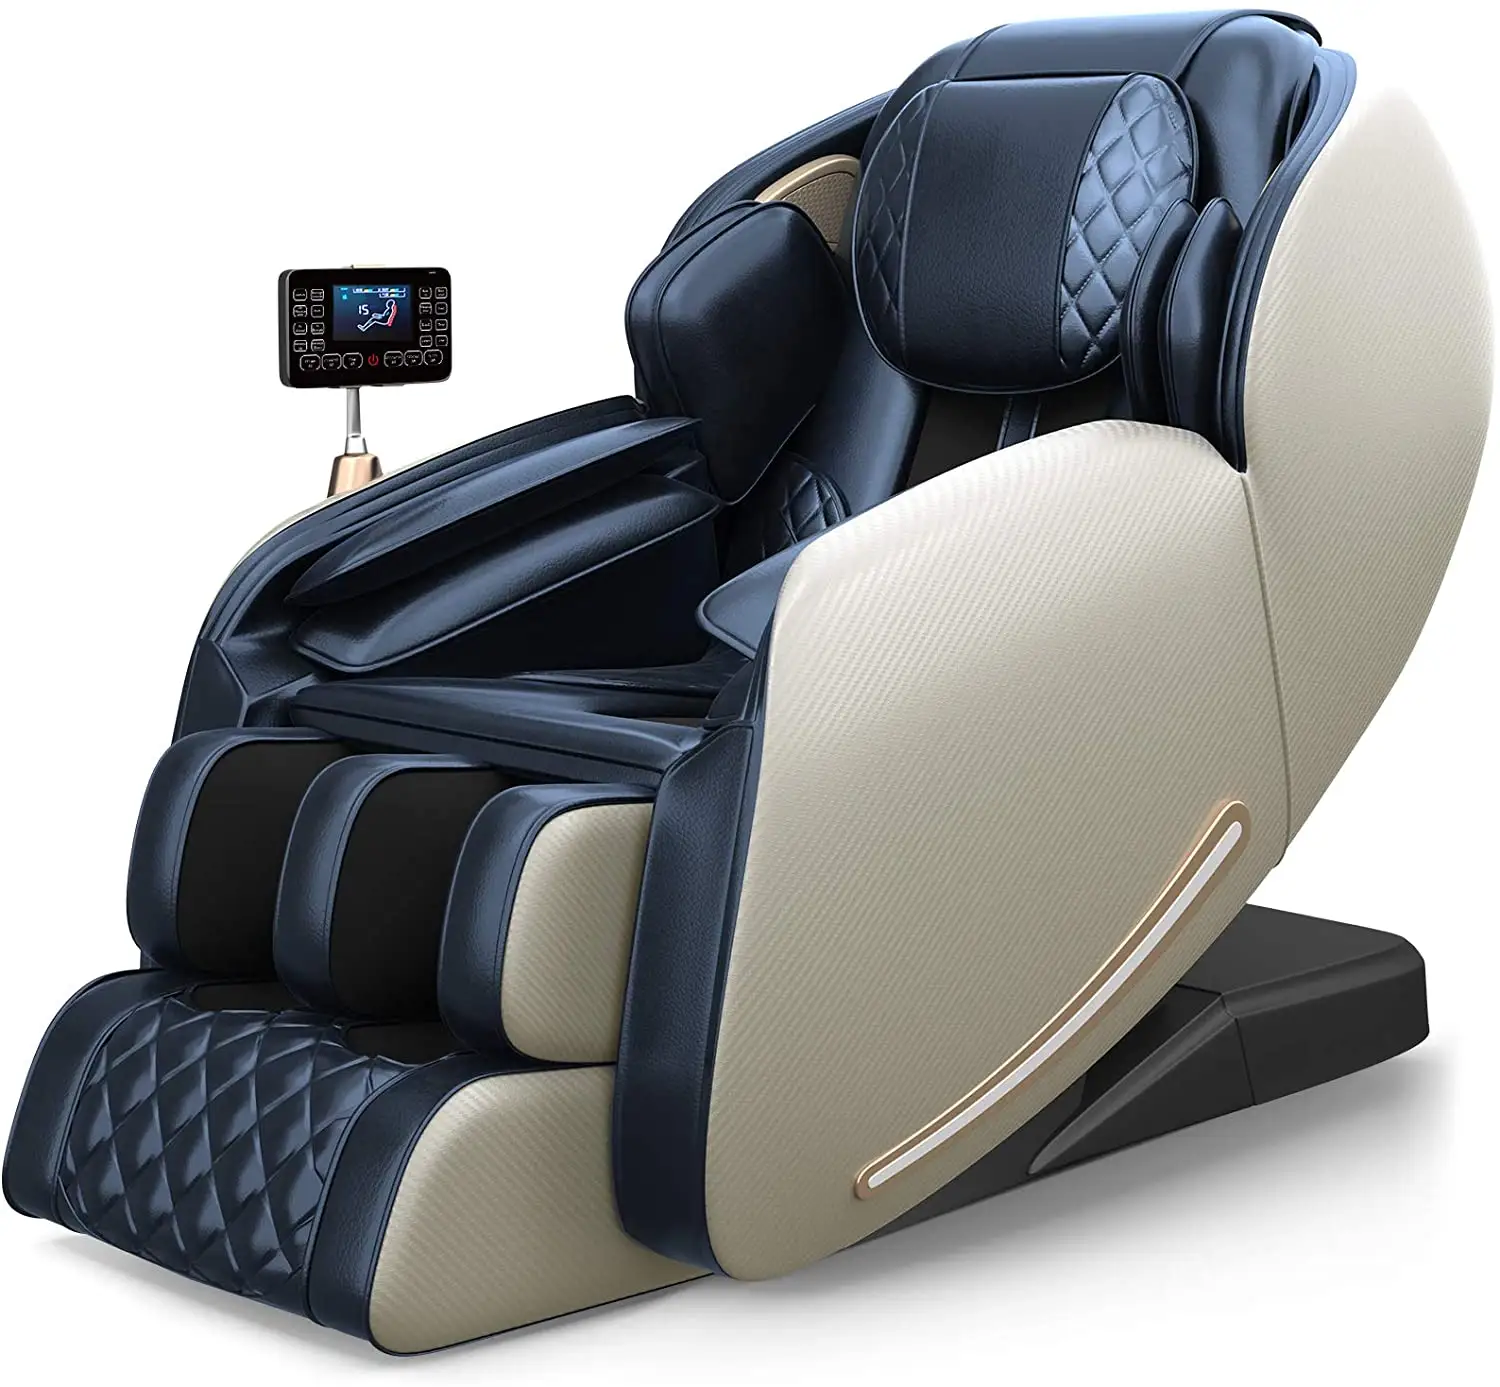 Warehouse in USA Real Relax SL Massage Chair Favor-06 Black Hot Sale Zero Gravity Luxurious Massage Chair